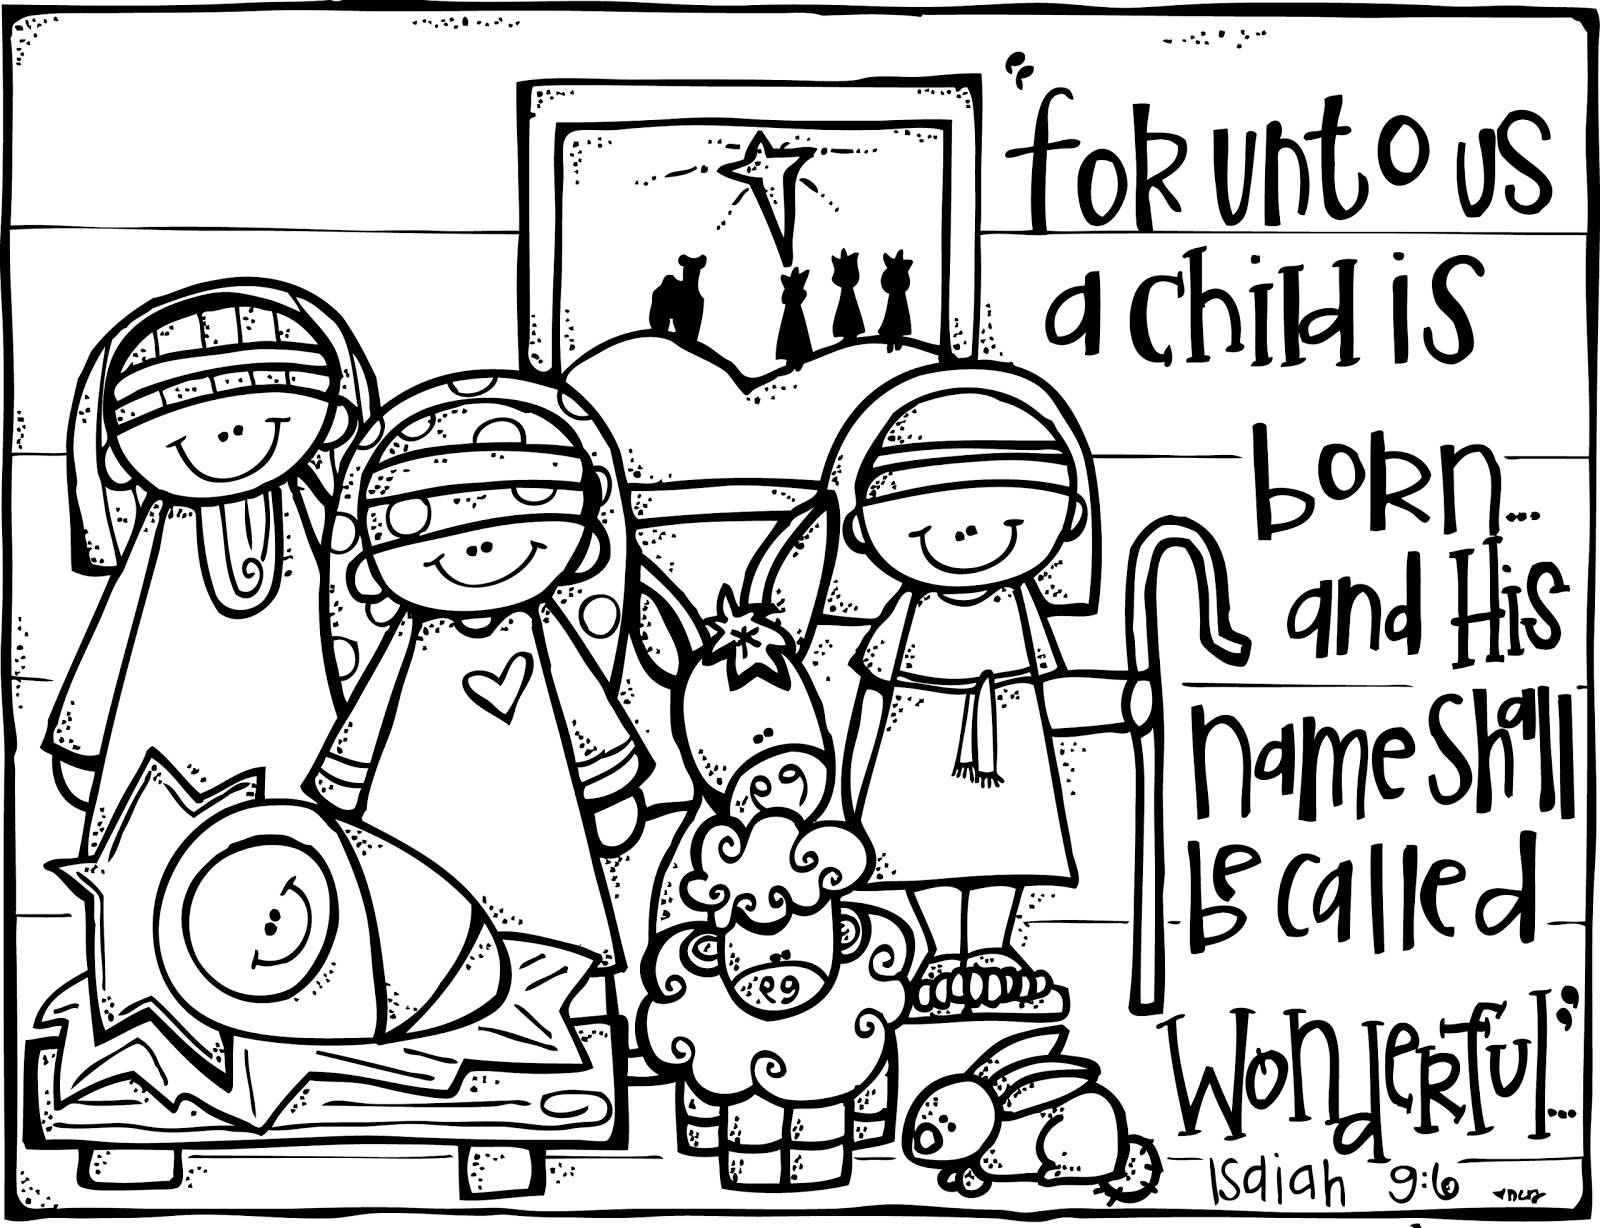 Top 10 Free Nativity Coloring Pages to Print - Best Coloring Page Ideas and Inspiration